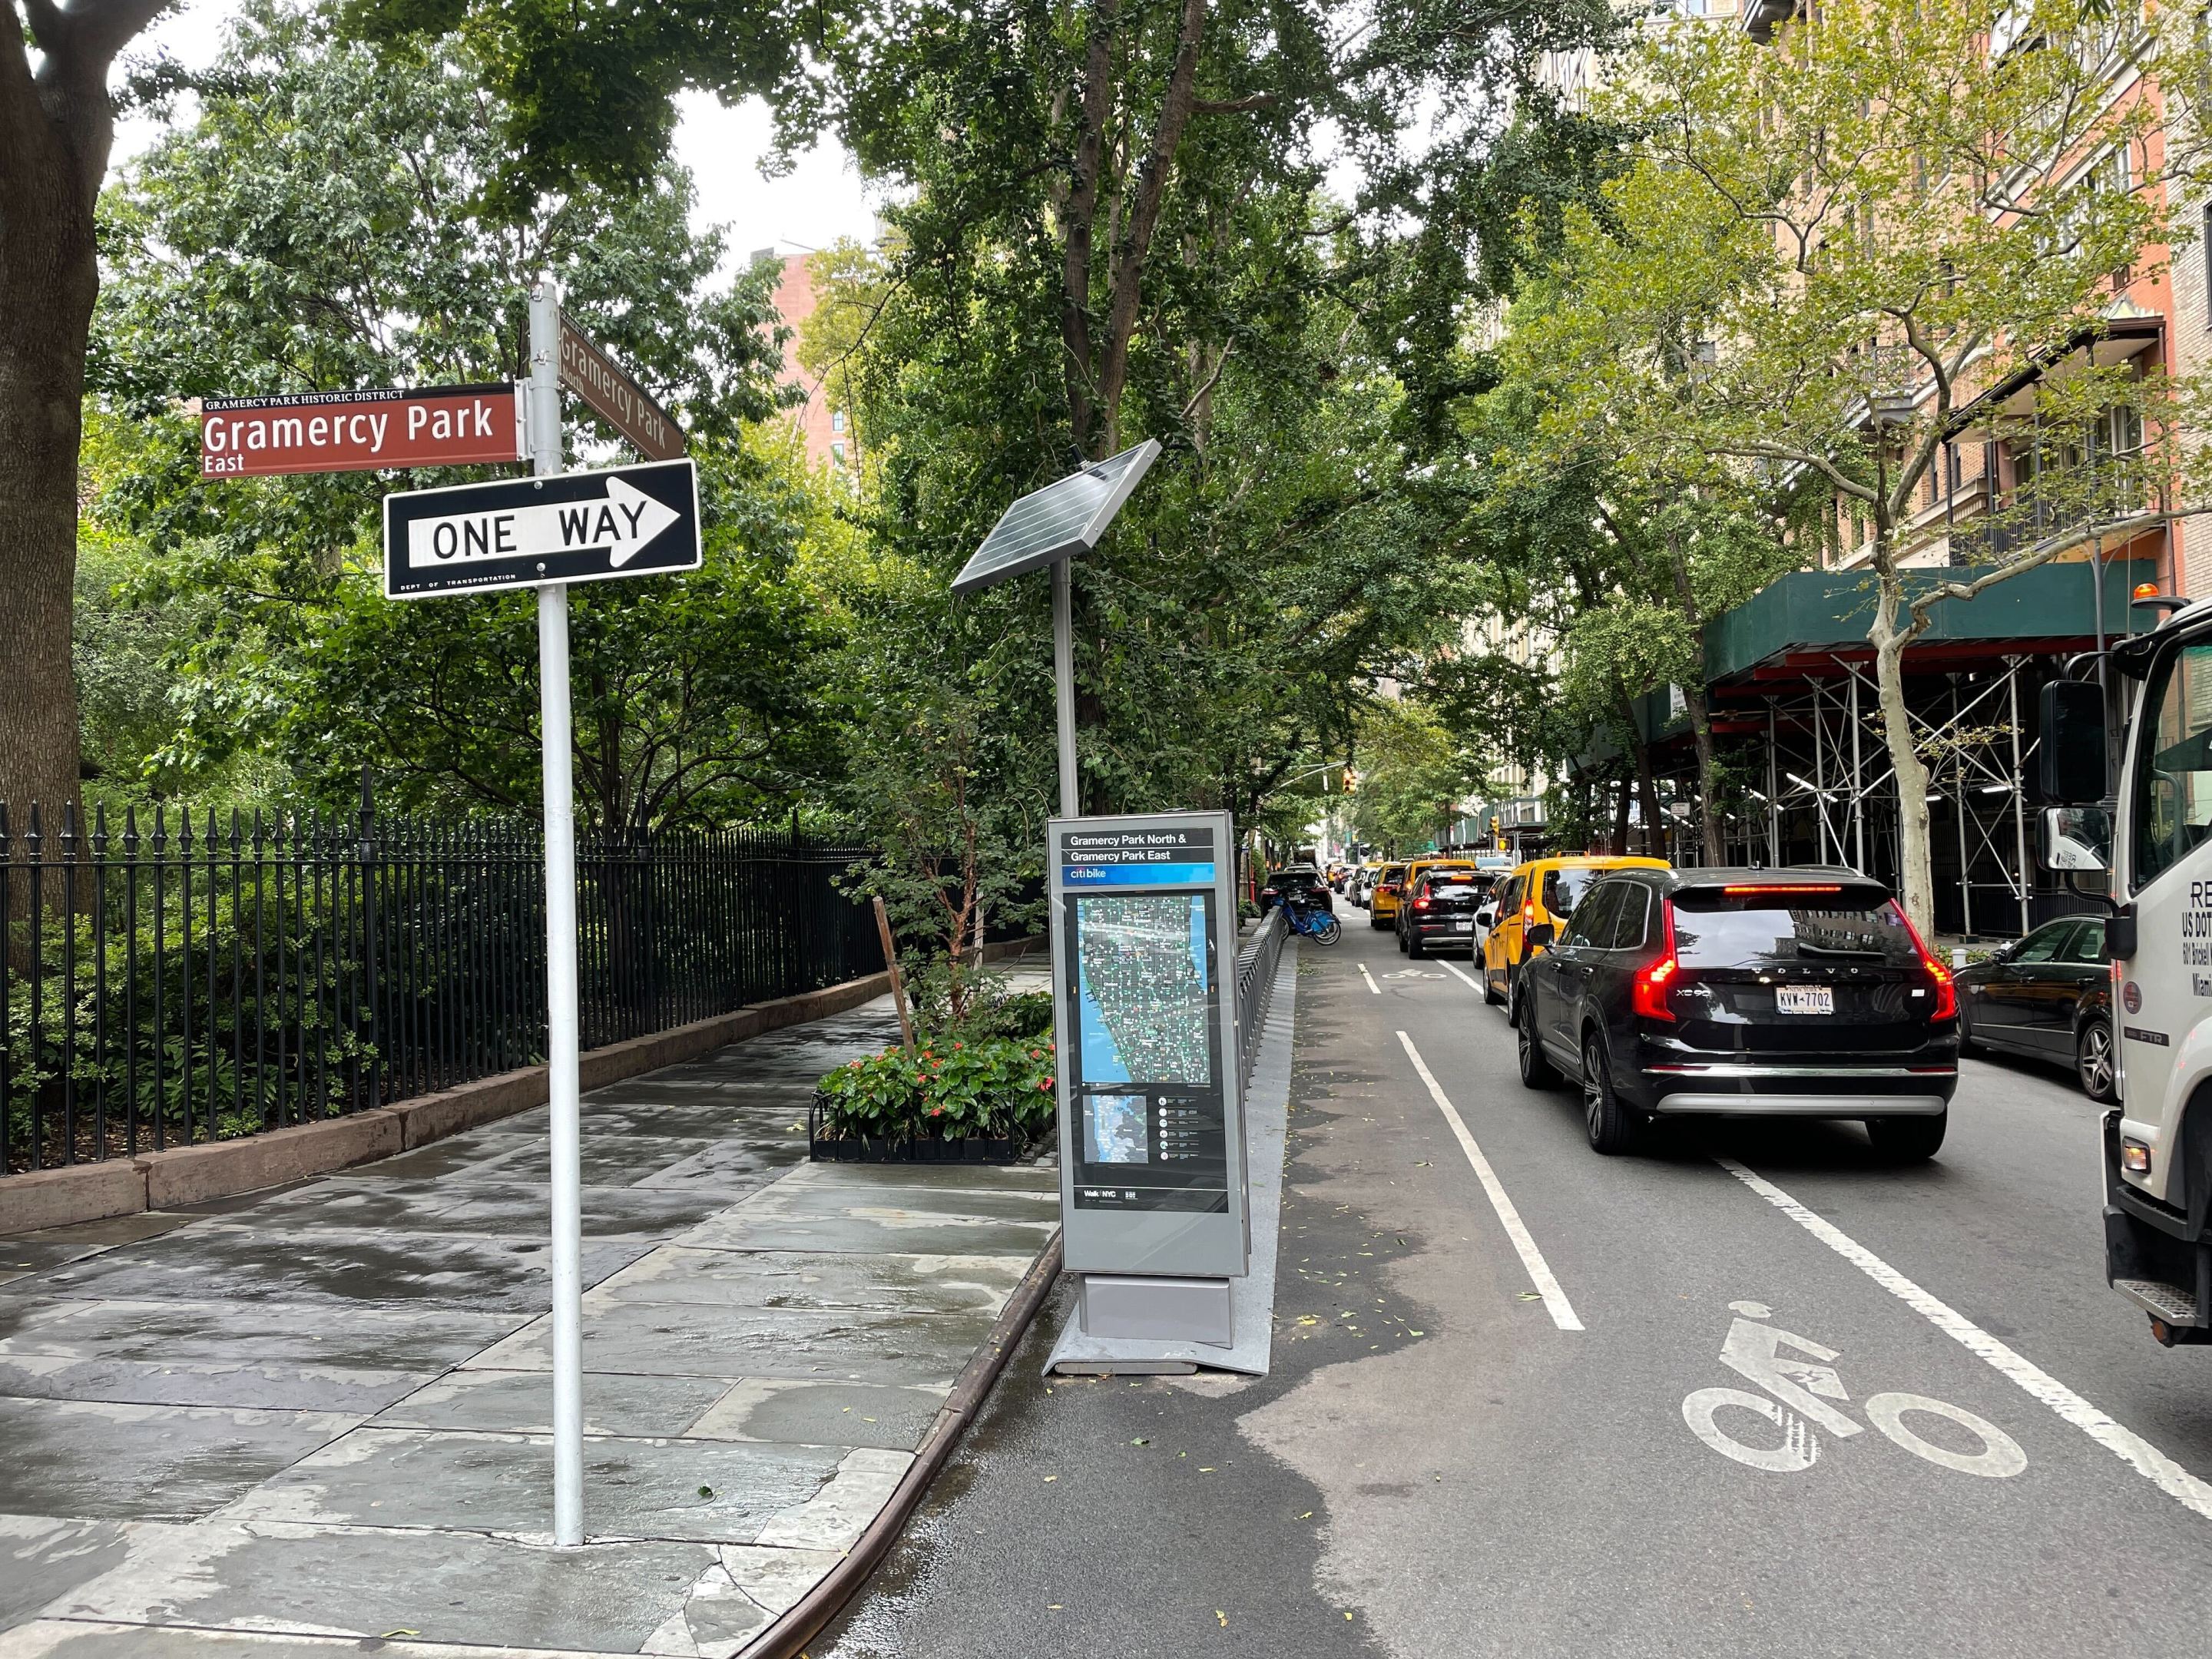 A view looking West on 21st Street, with Gramercy Park on the far left, and the Citi Bike rack sitting on 21st Street, with traffic in the bike lane.